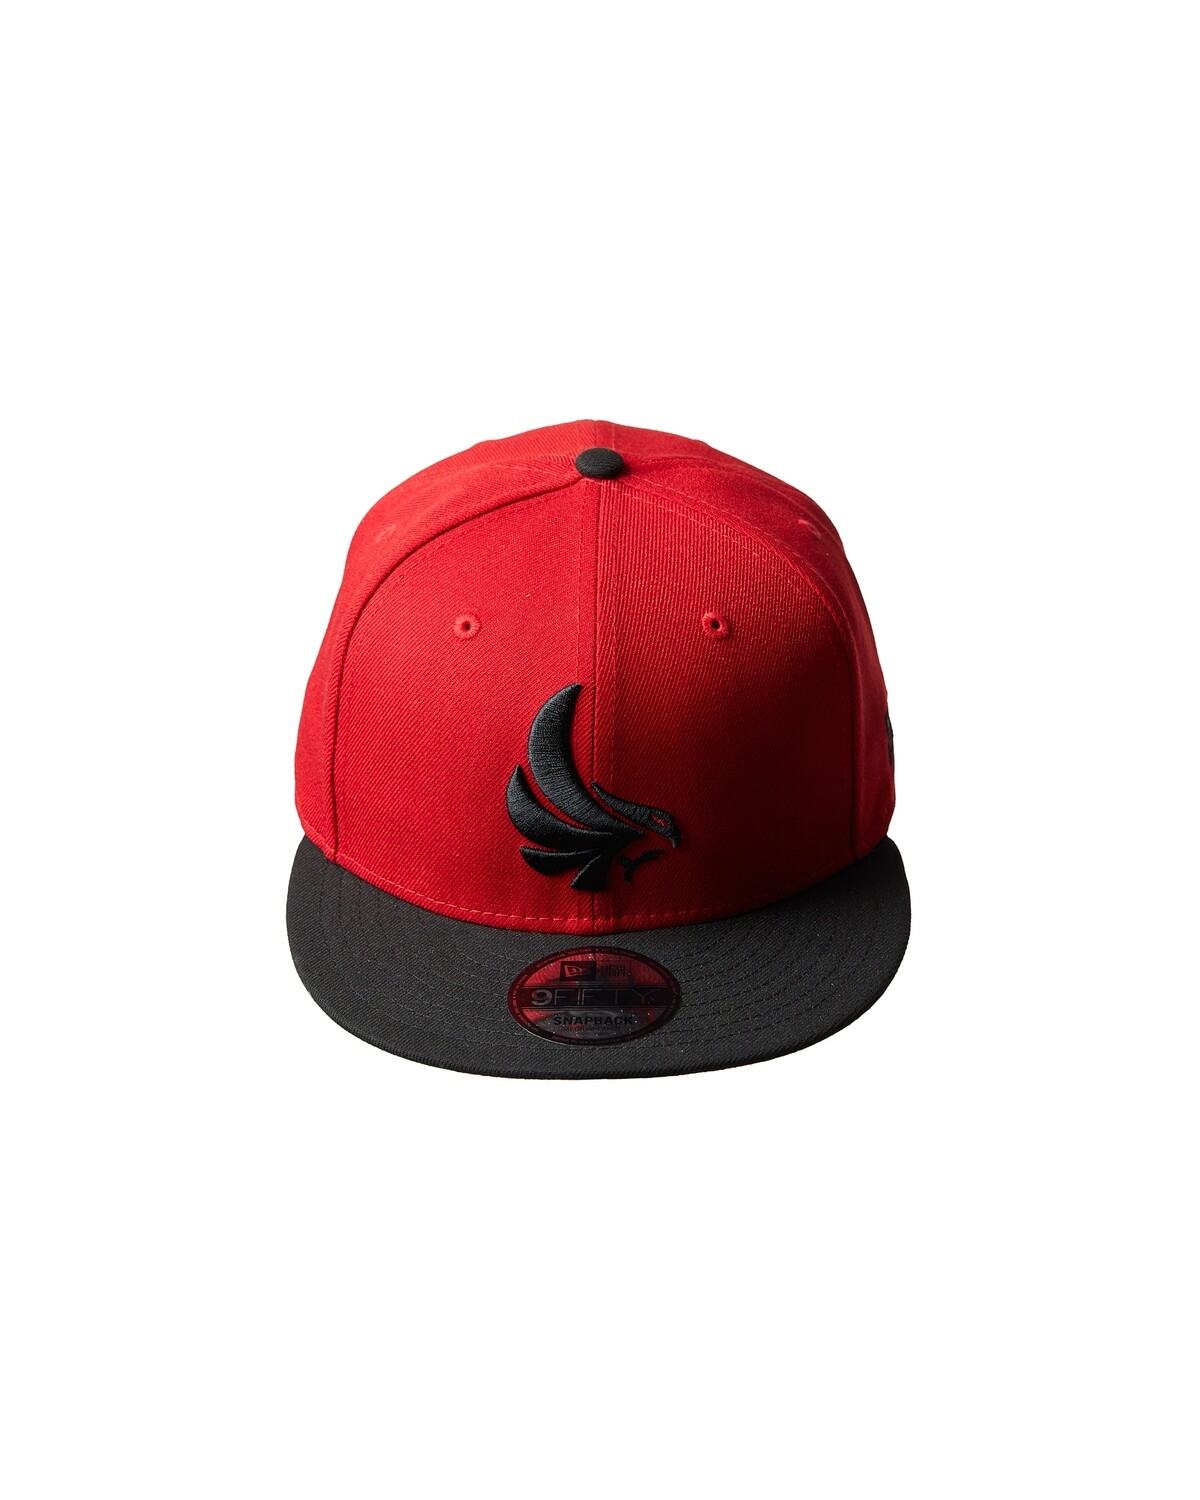 9FIFTY CHERRY SNAPBACK - RED